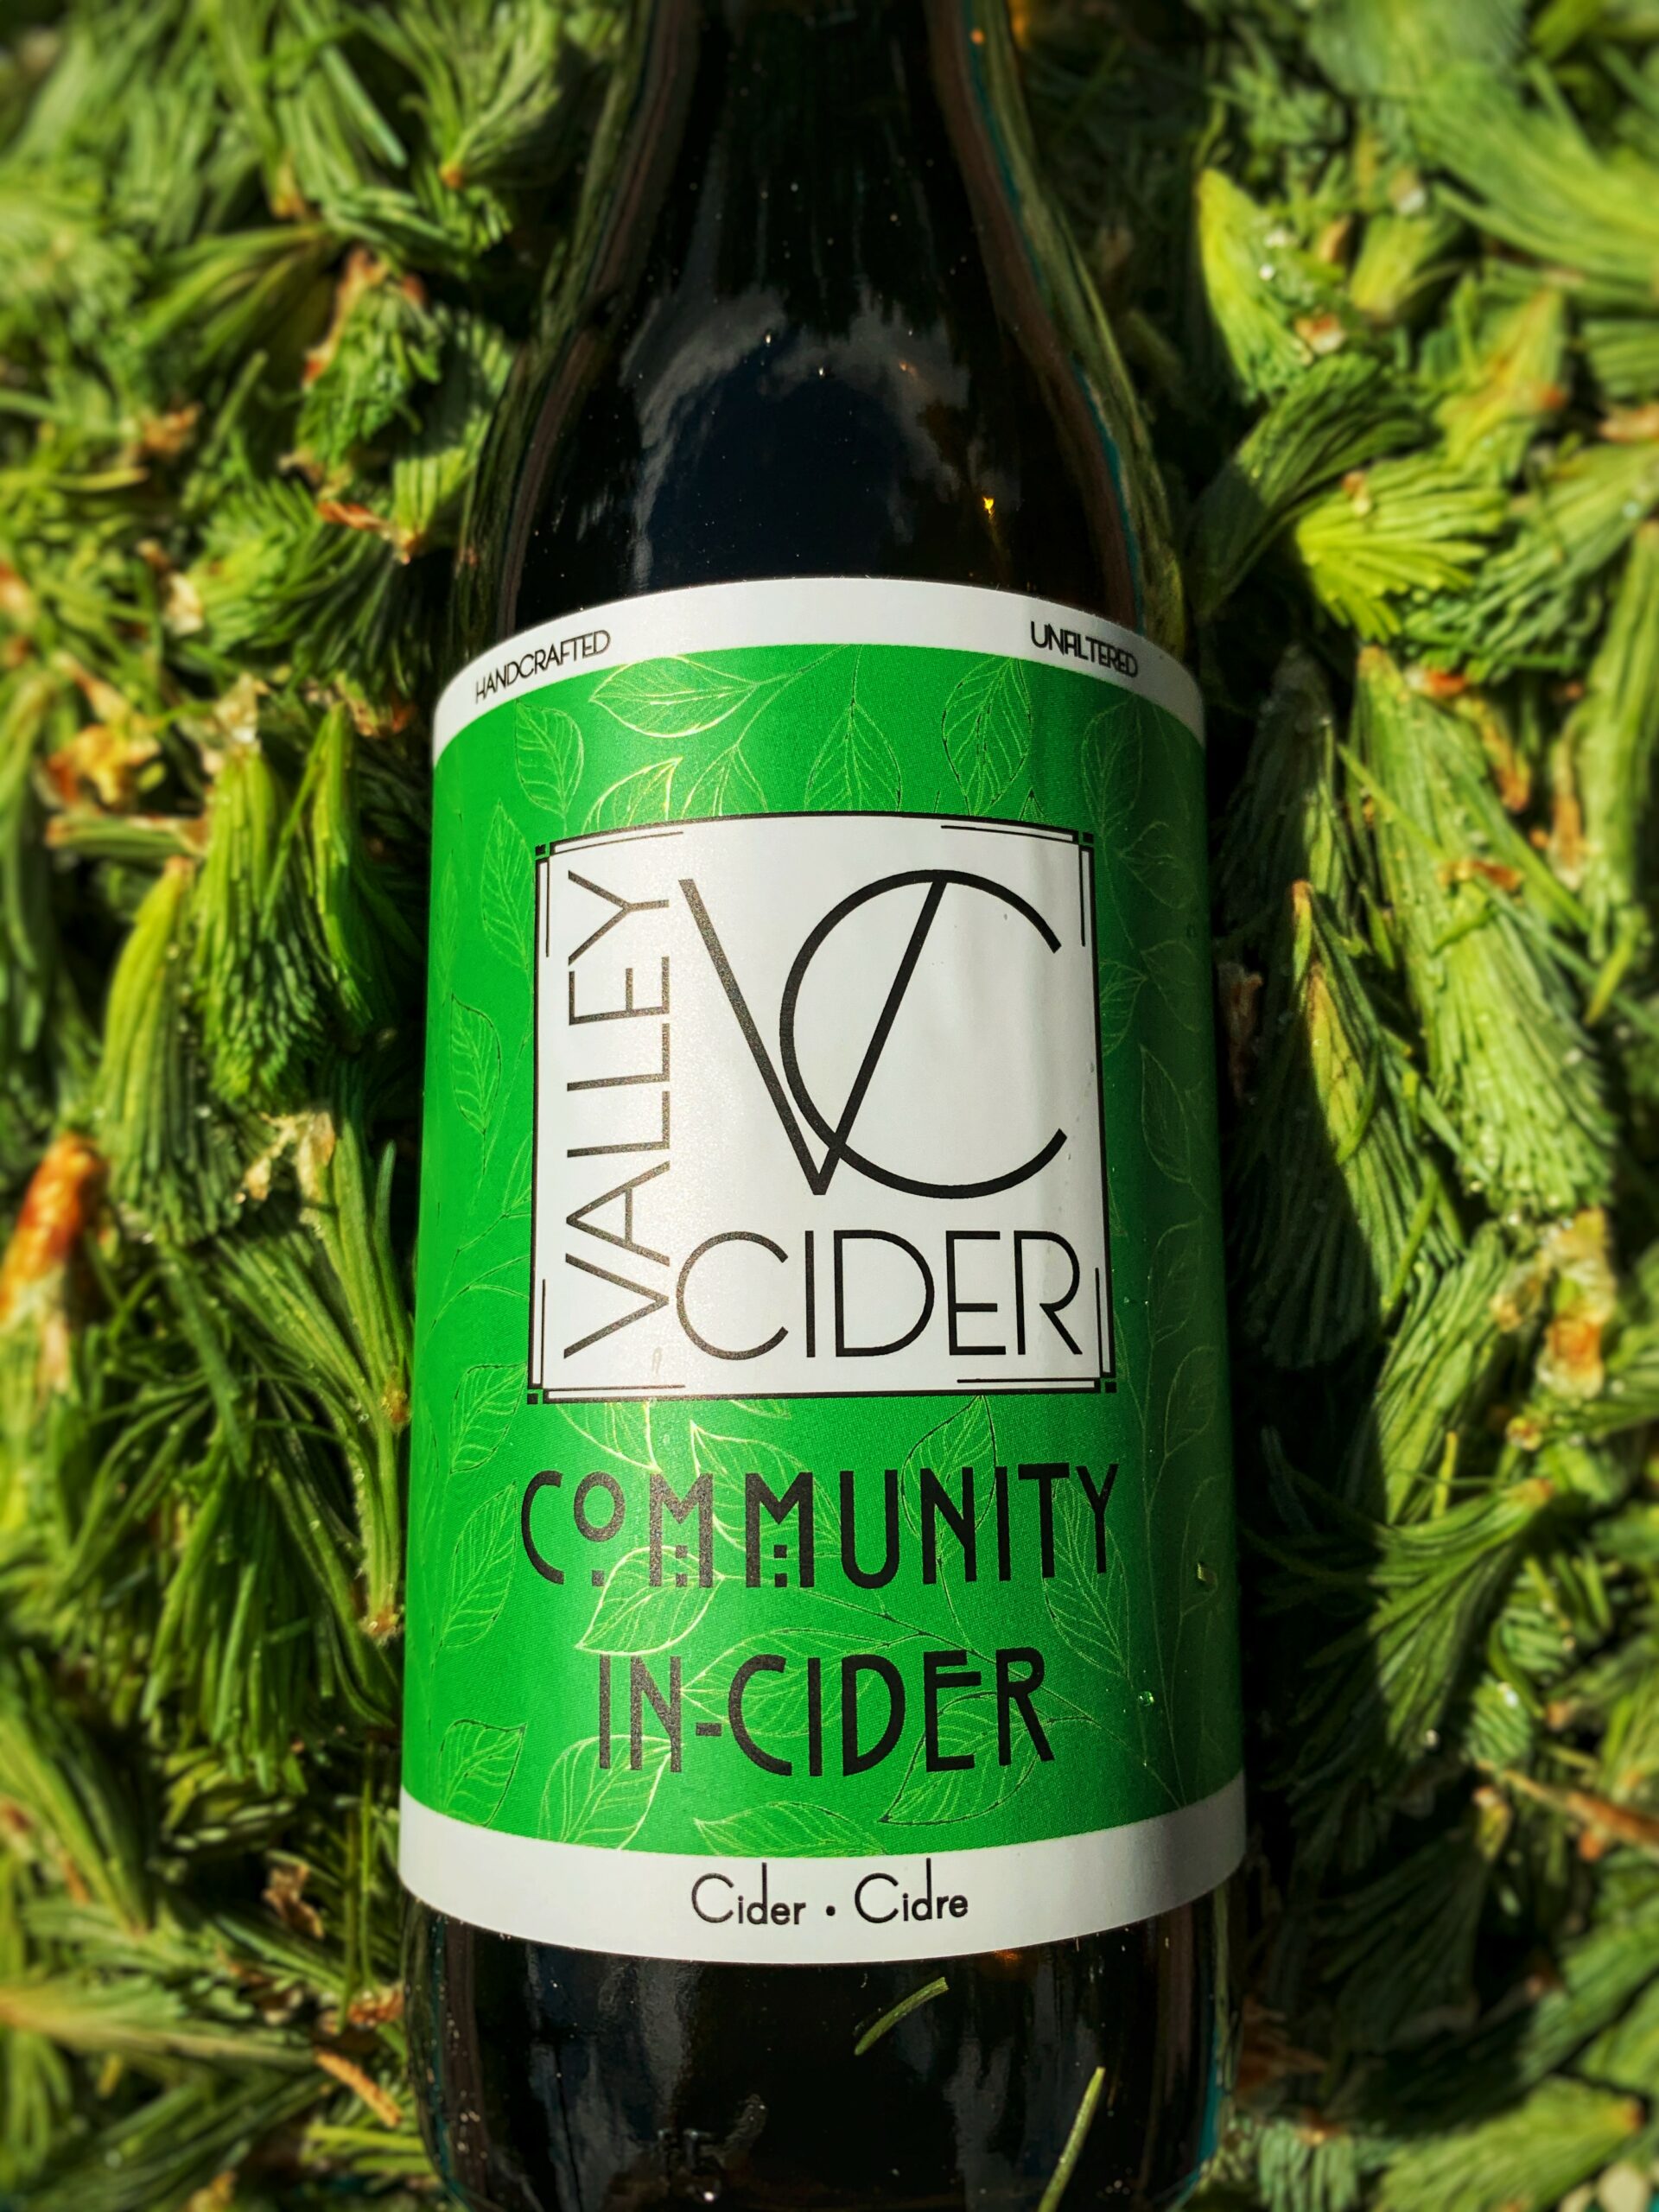 Cowichan Valley Community Cider